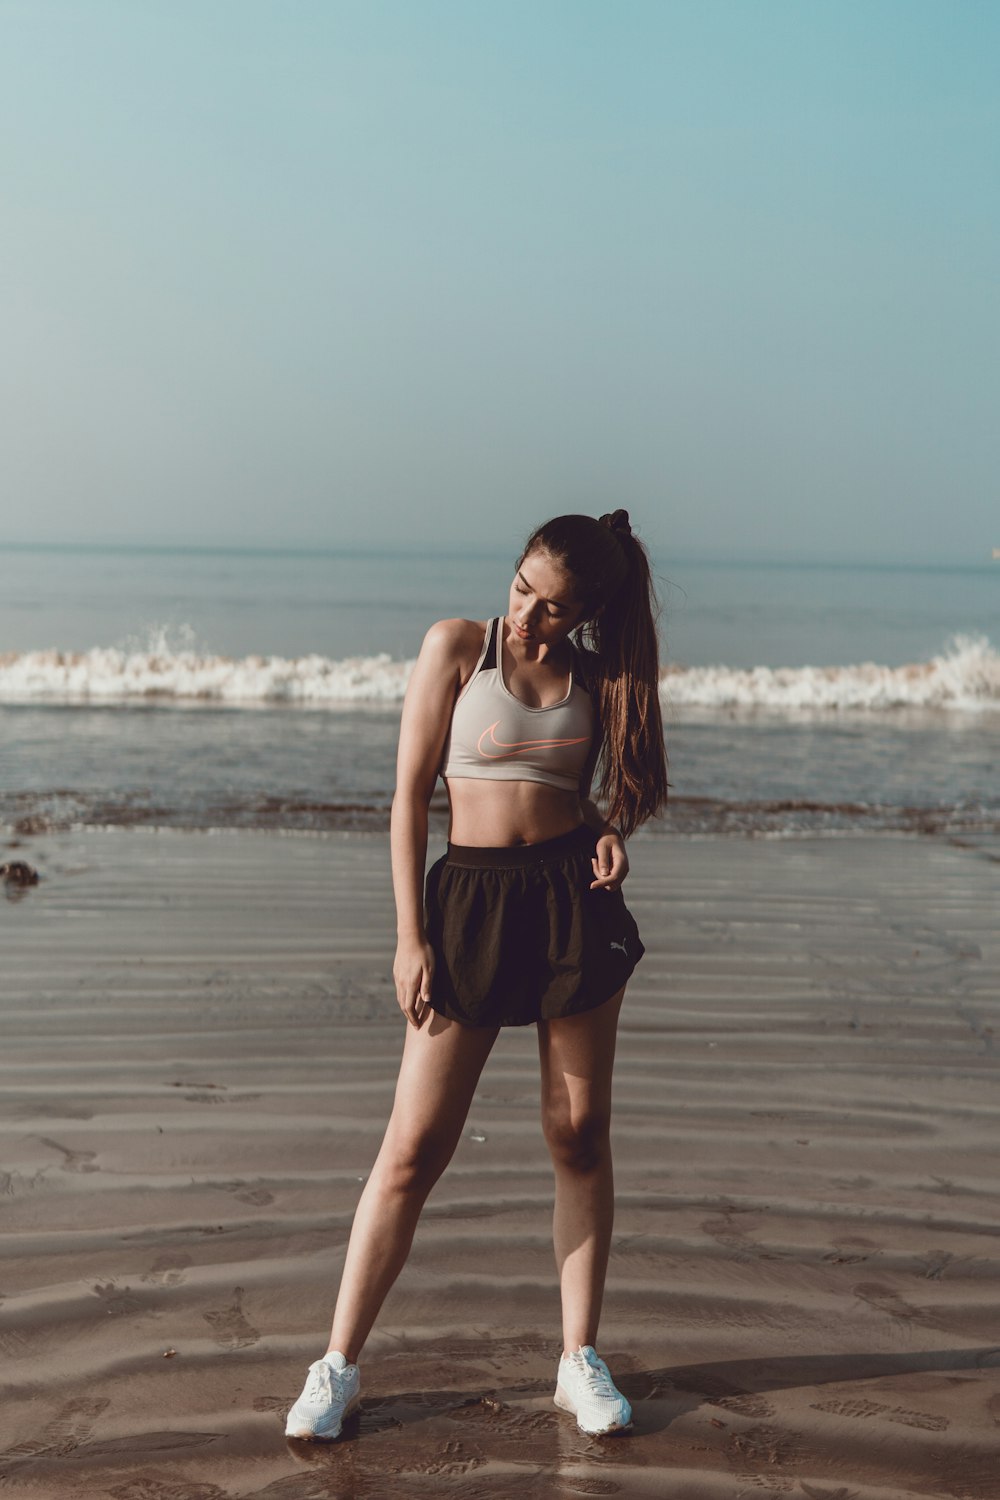 Woman in sport bra and shorts at beach photo – Free Grey Image on Unsplash